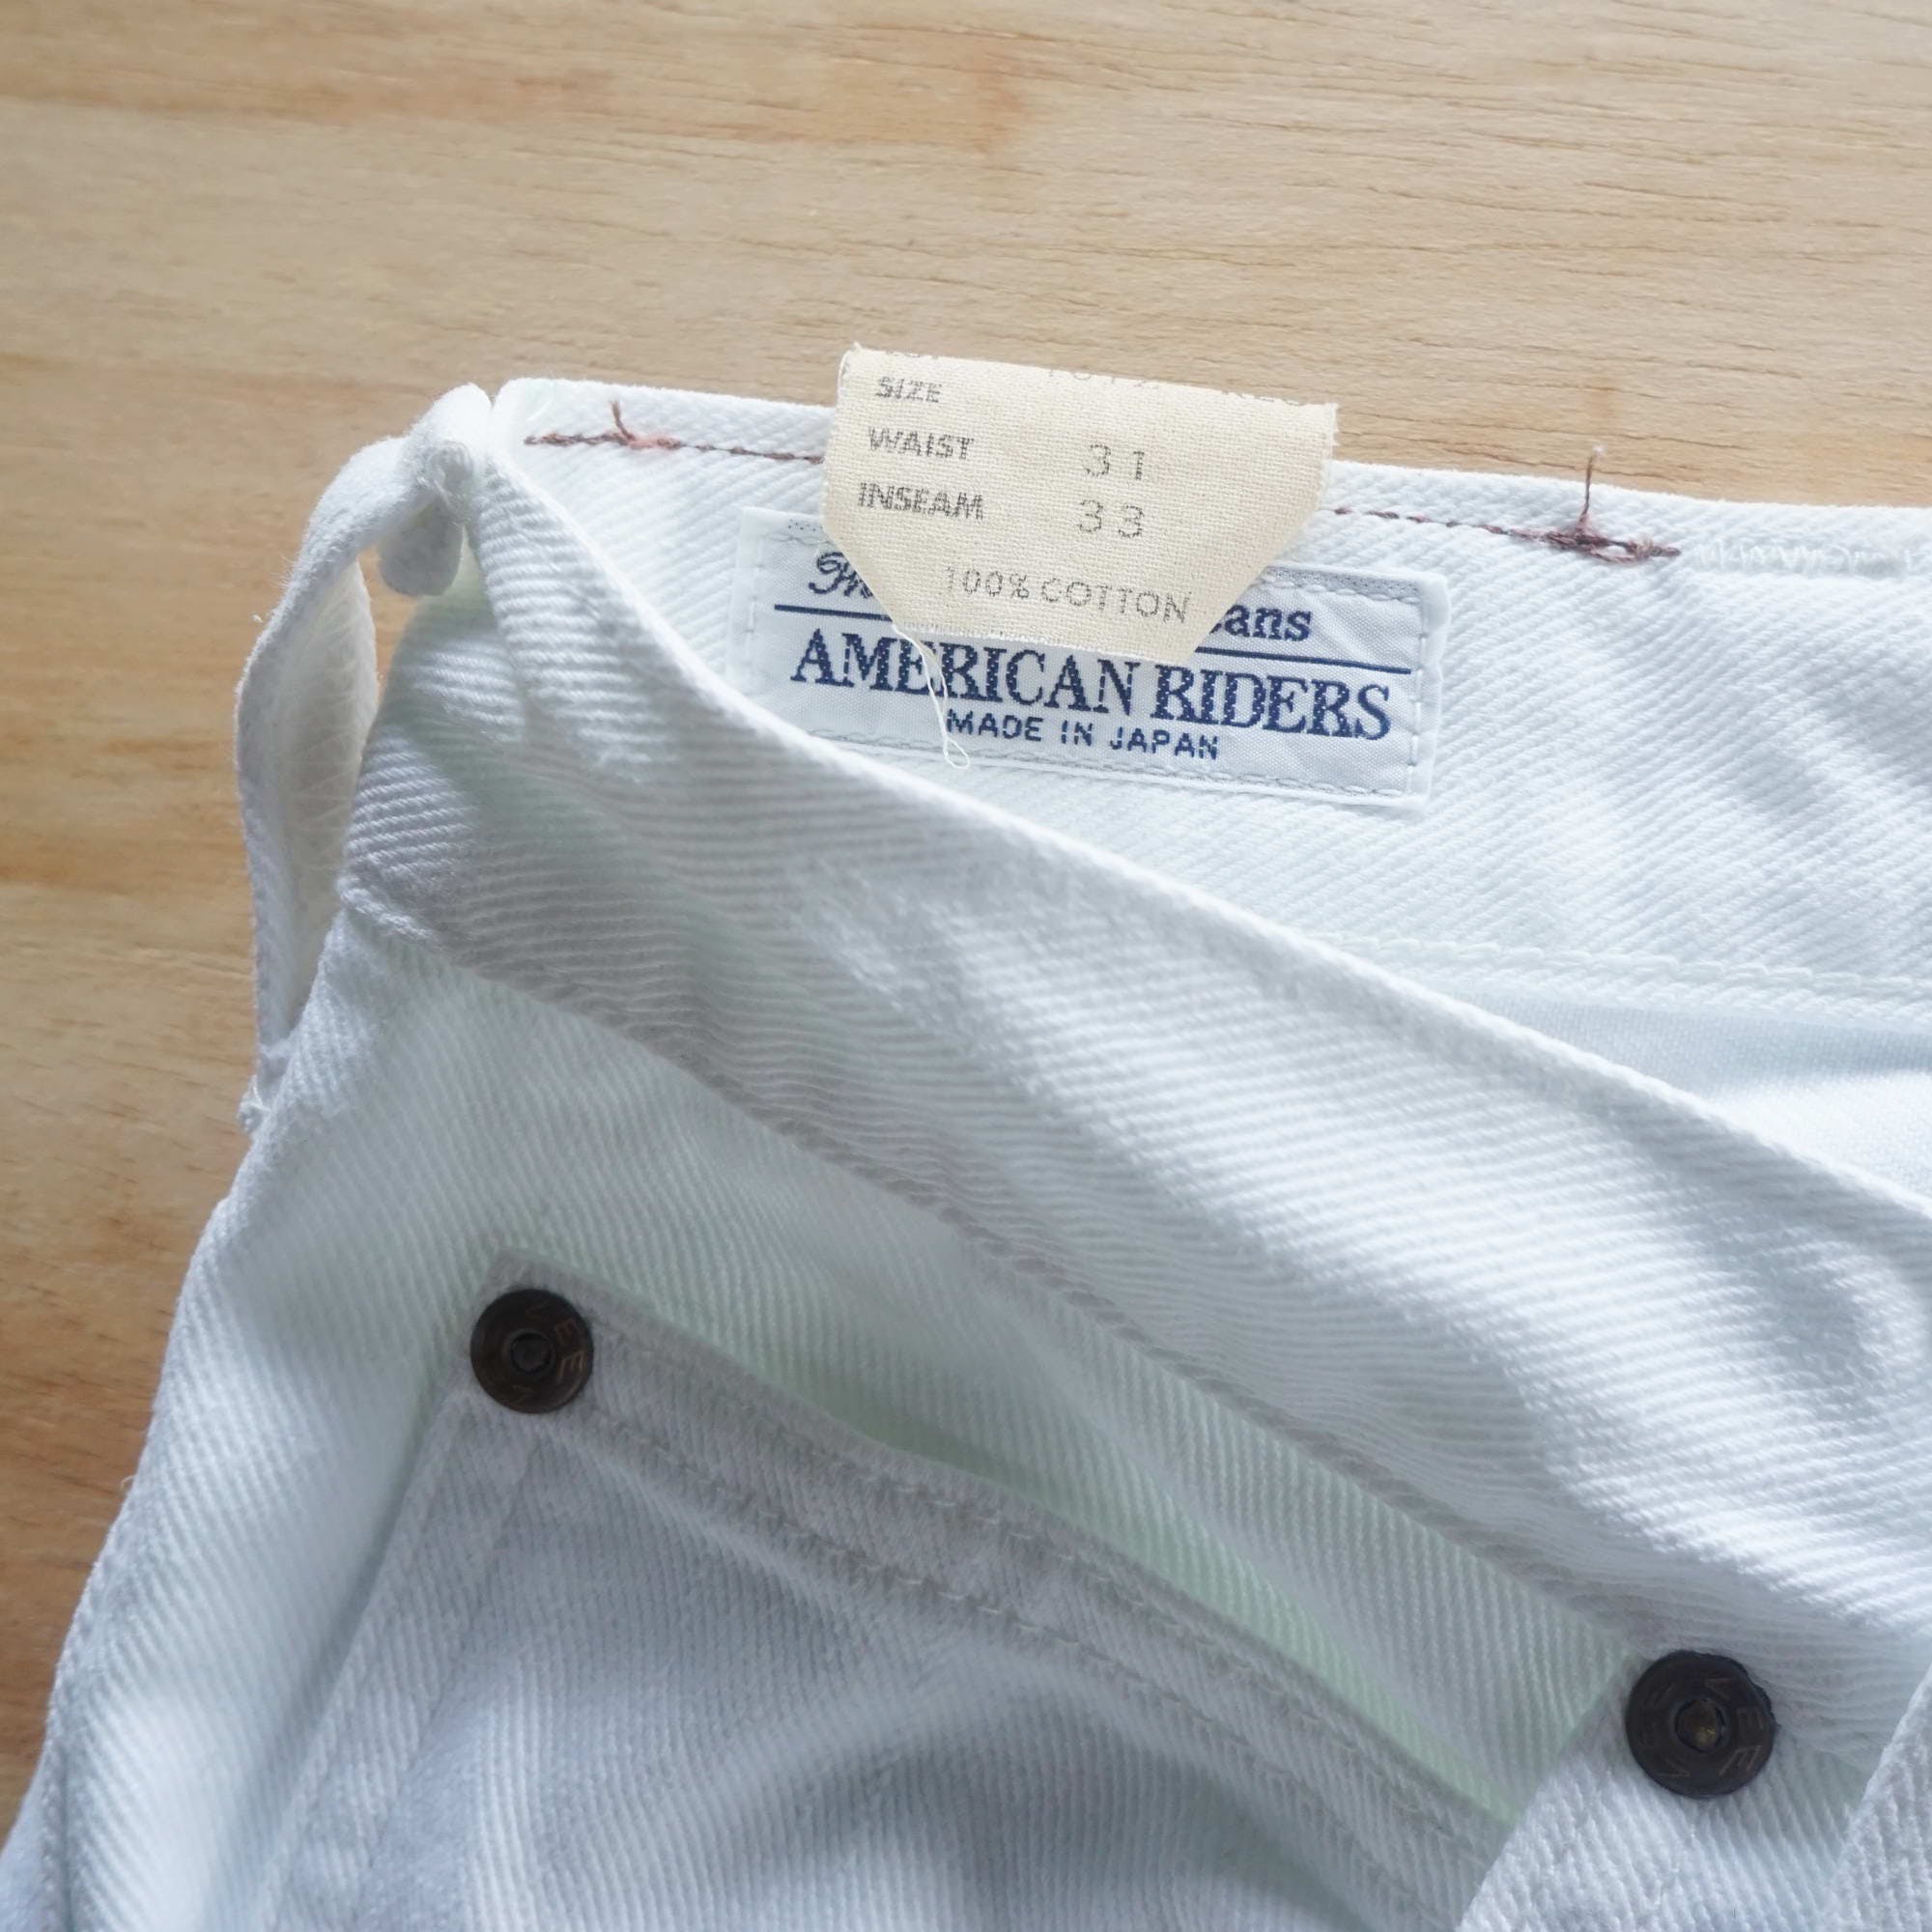 Vintage - LEE American Riders -Made in Japan- Straight Cut White Jeans - 7